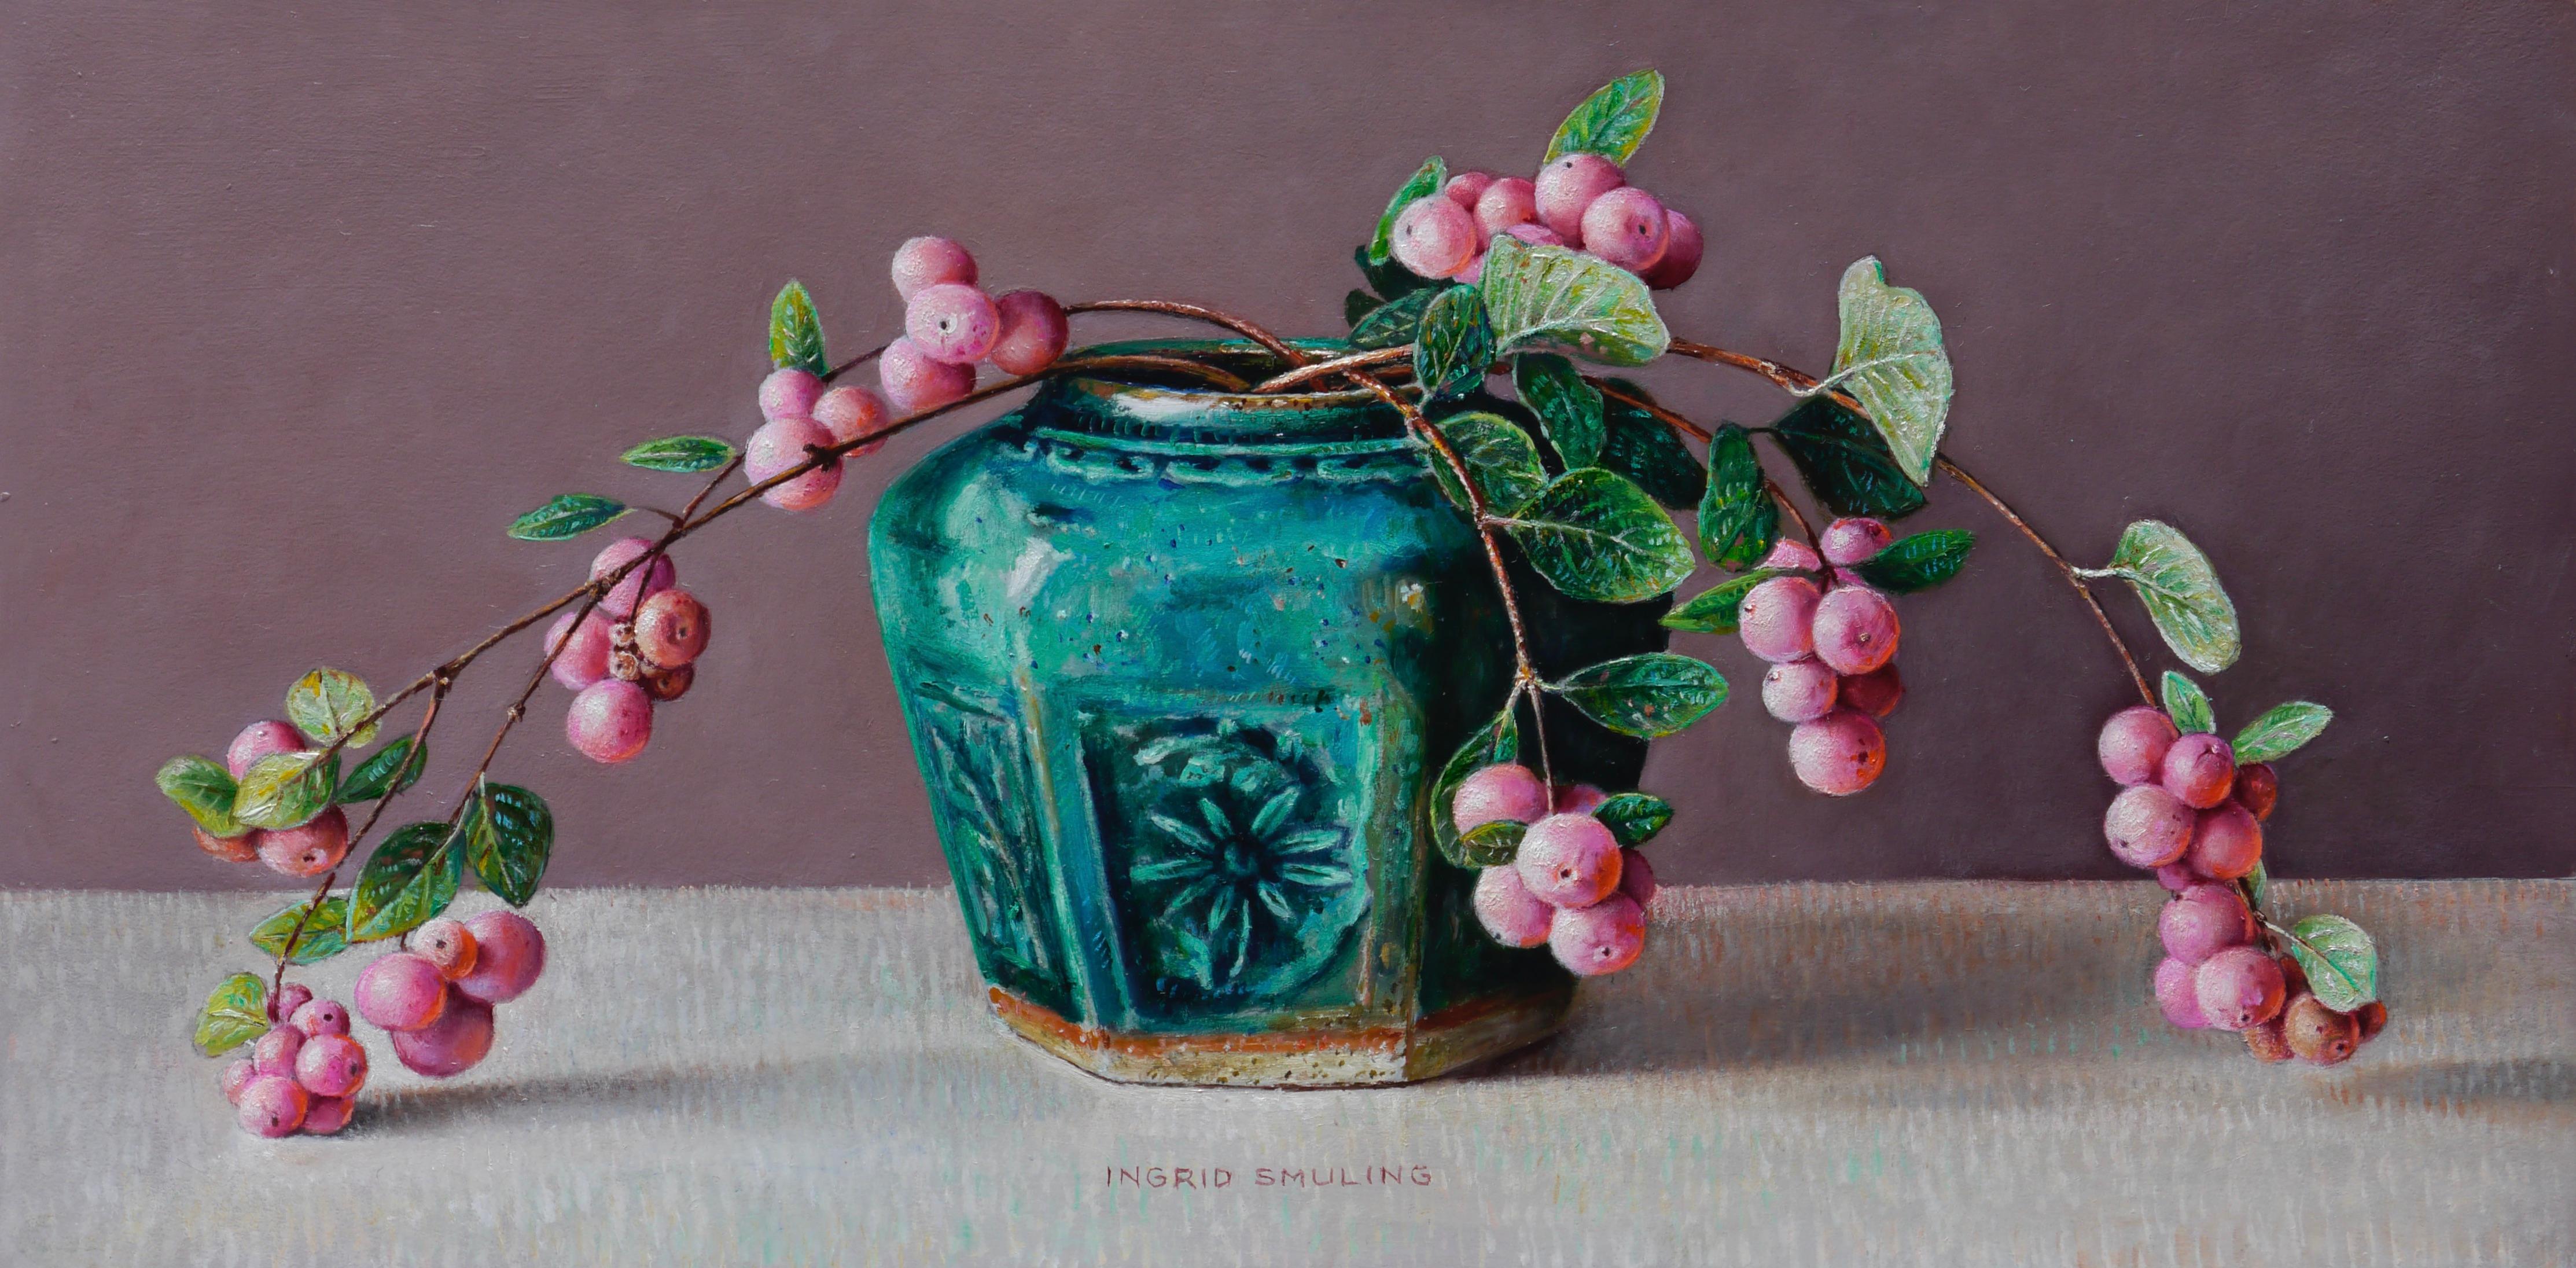 Green Ginger jar with snowberries- 21st Century Contemporary Still-life Painting